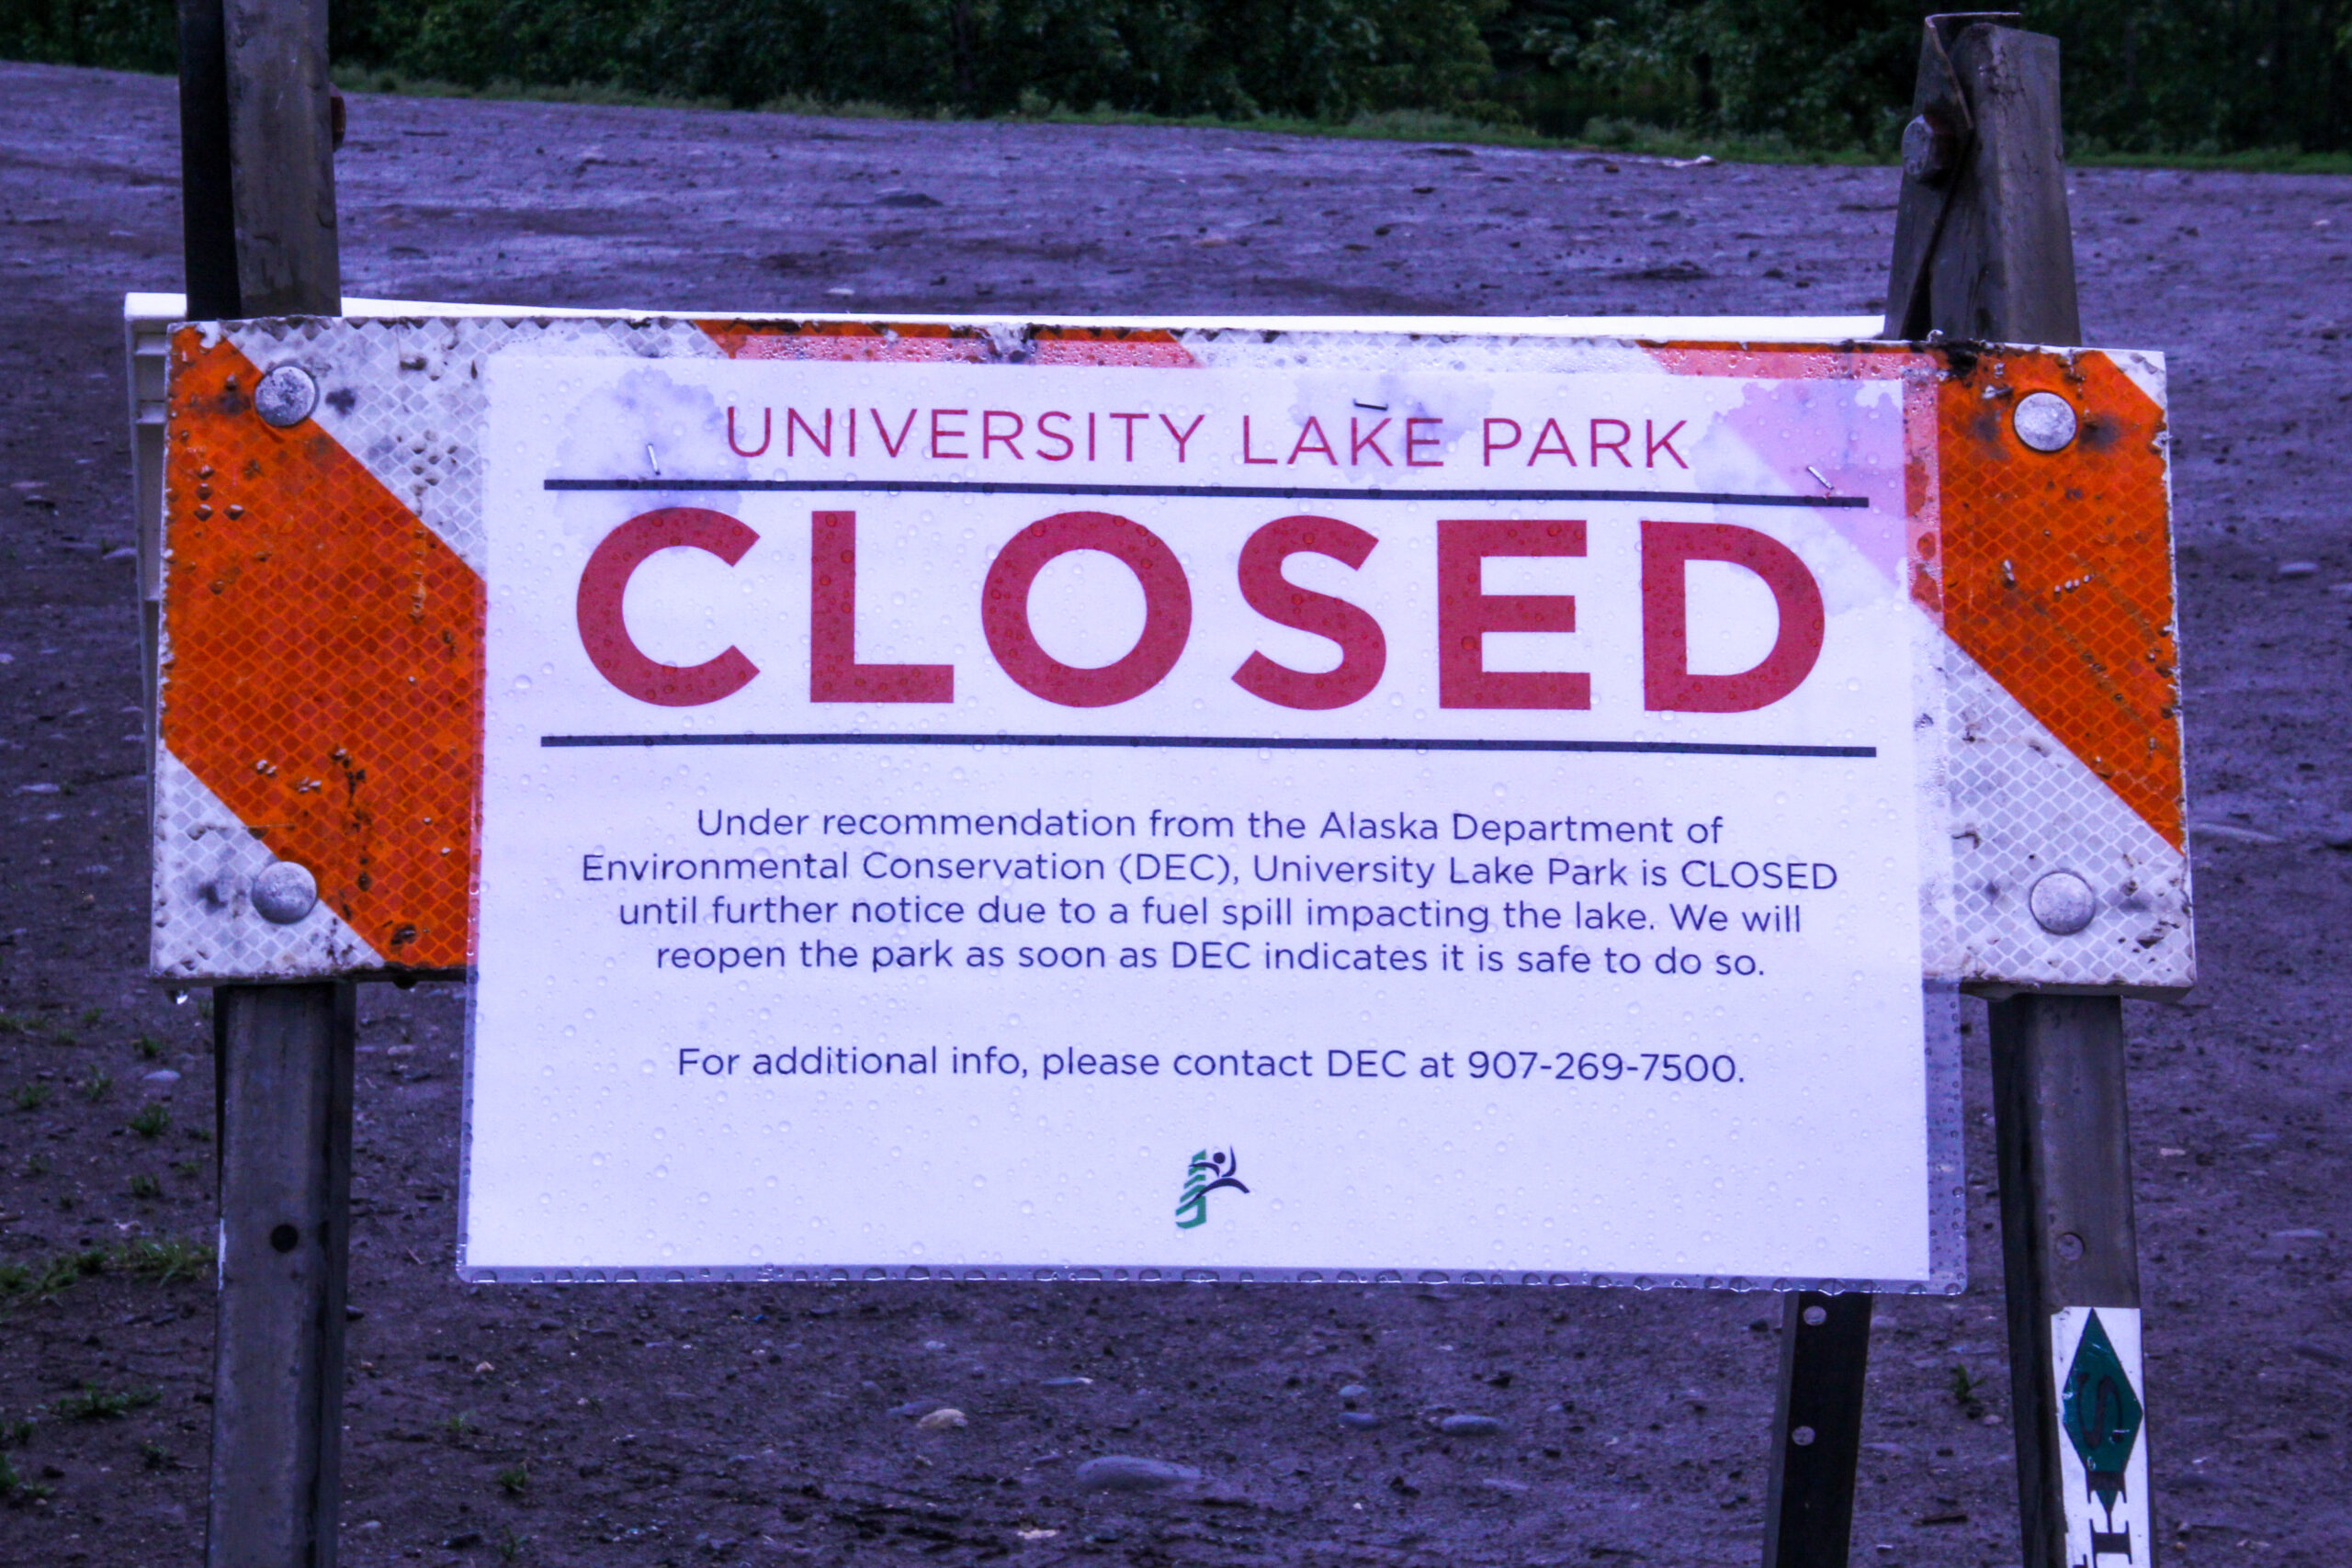 A sign that reads "University Lake Park CLOSED. Under recommendation from the Alaska Department of Environmental Conservation (DEC), University Lake Park is CLOSED until further notice due to a fuel spill impacting the lake. We will reopen the park as soon as DEC indicates it is safe to do so. For additional info, please contact DEC at 907-269-7500."